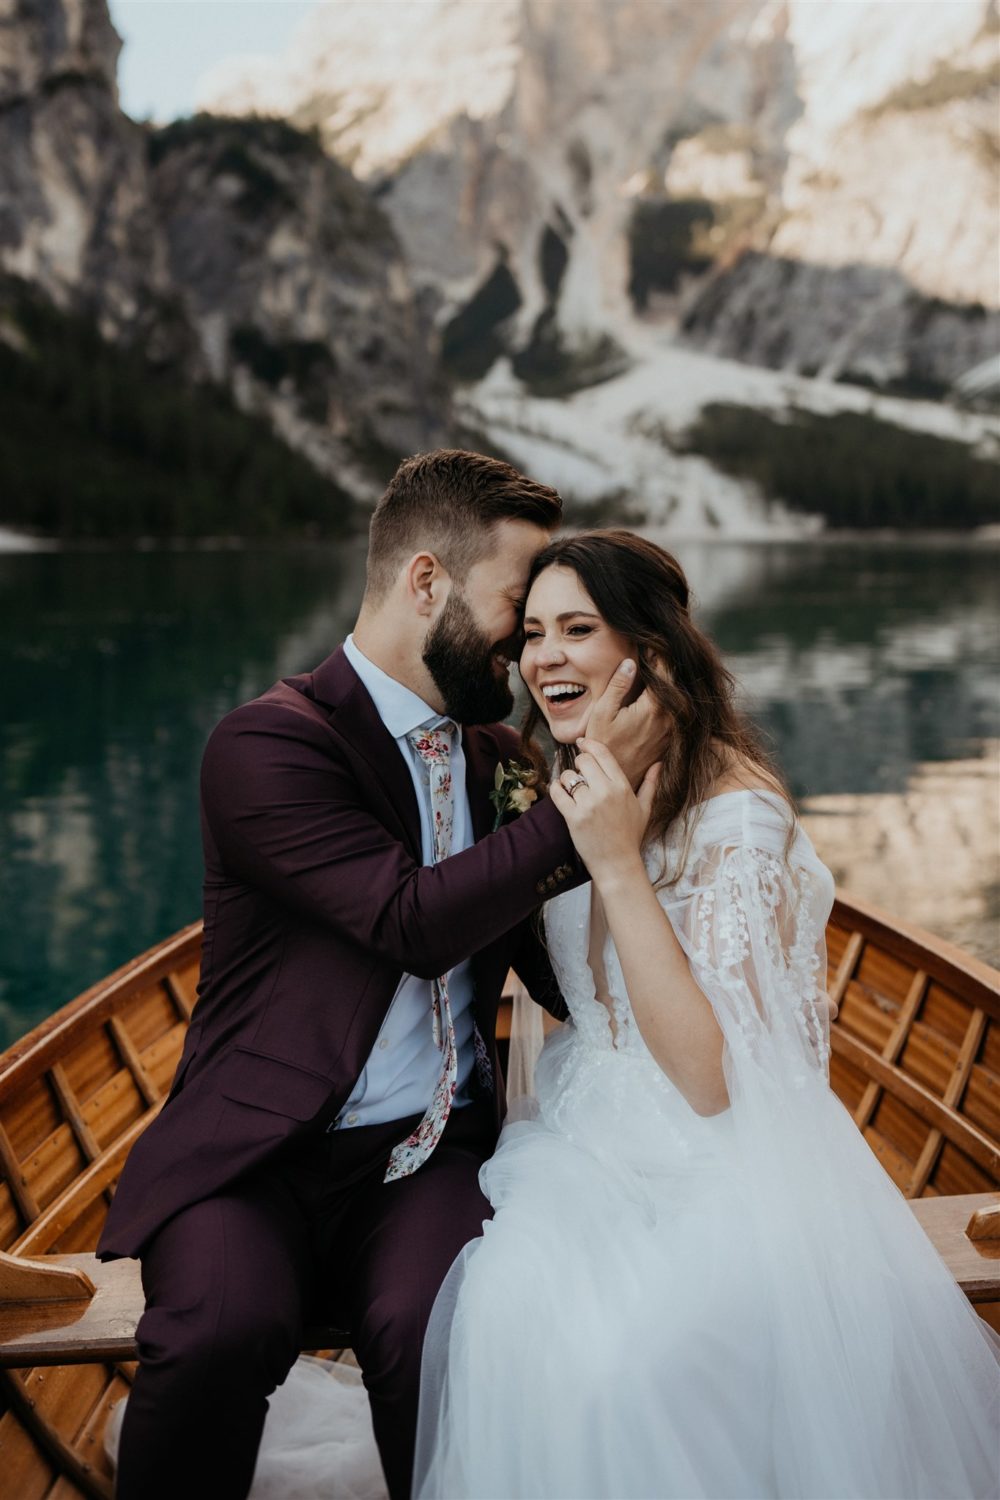 Couple embraces in boat on lake in Dolomites